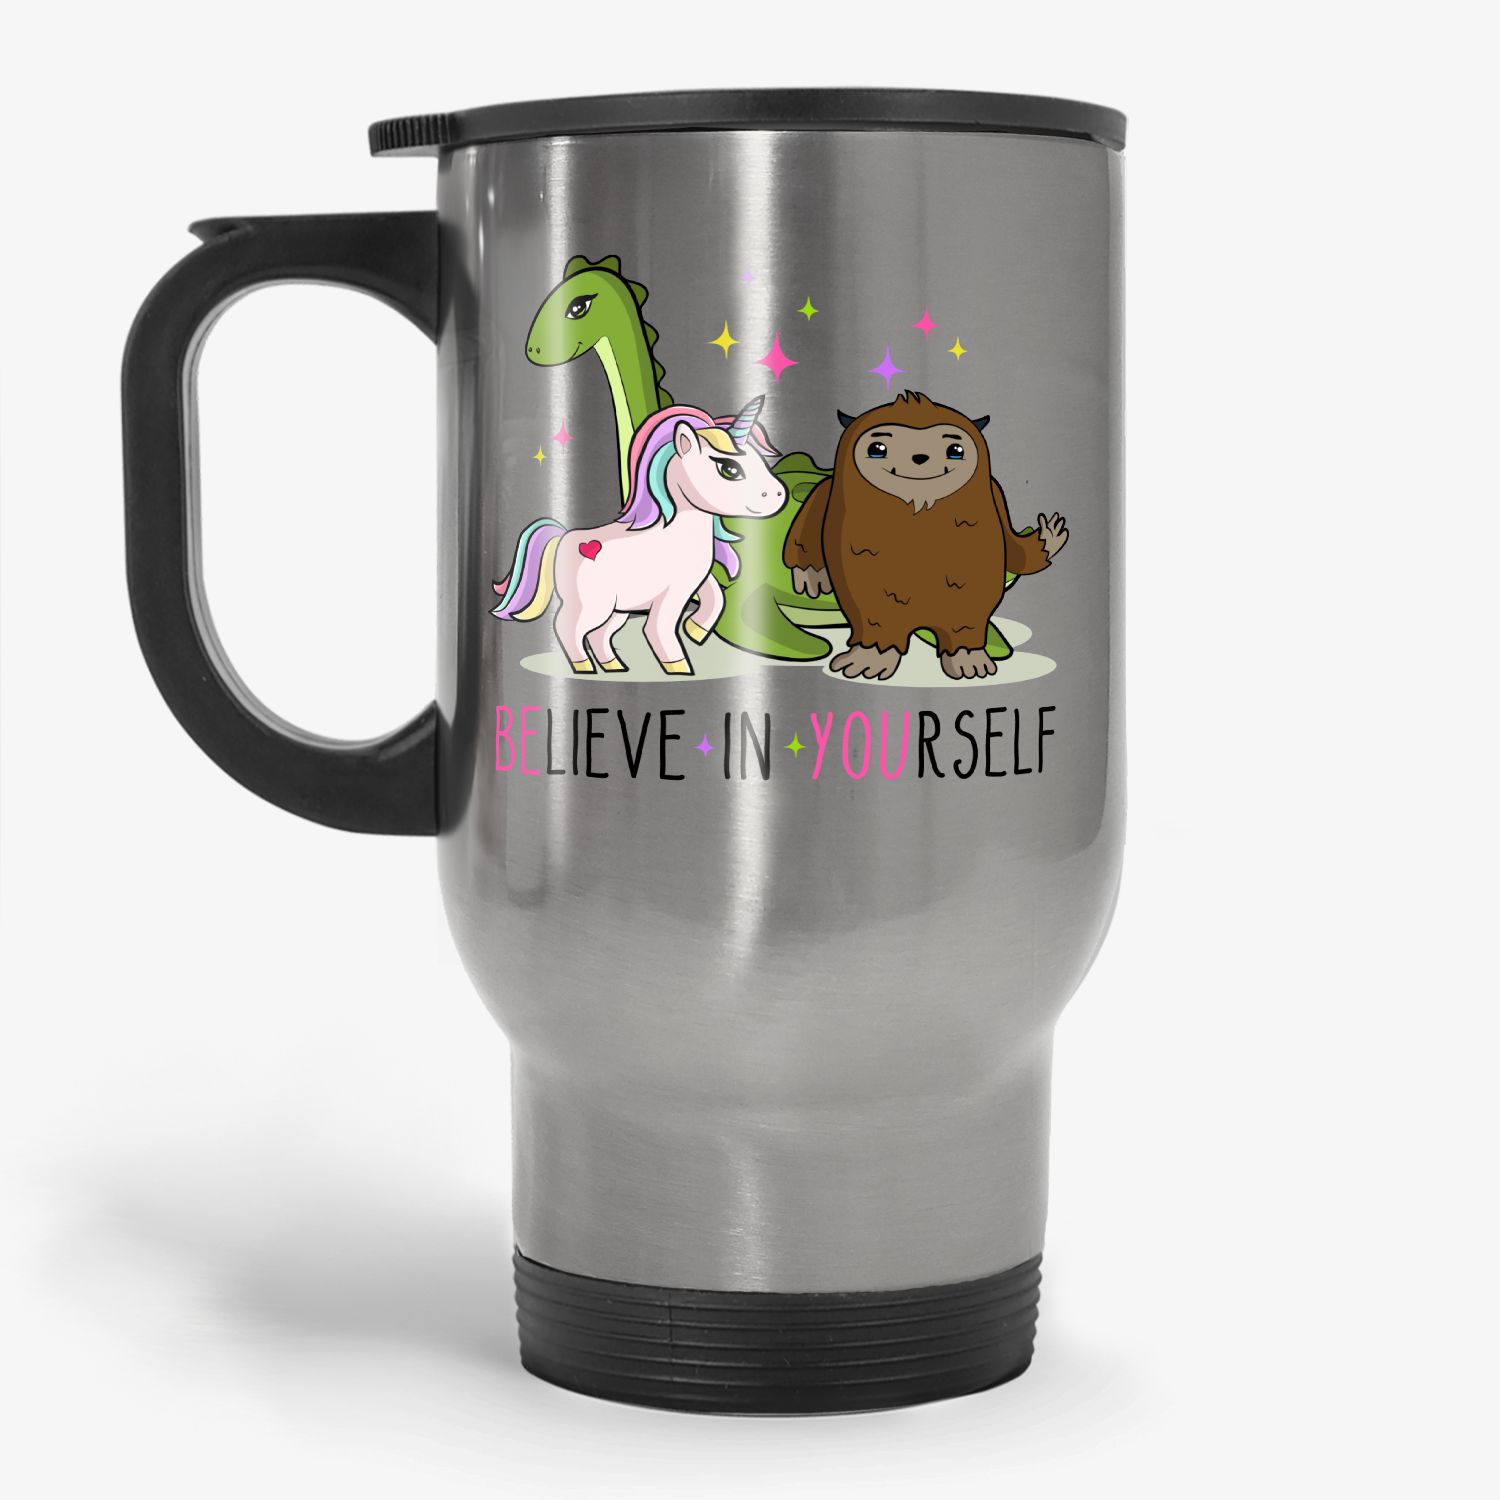 Believe In Yourself, funny inspirational travel mug, cute gift for her,  graduation gift, motivational, for daughter, for niece